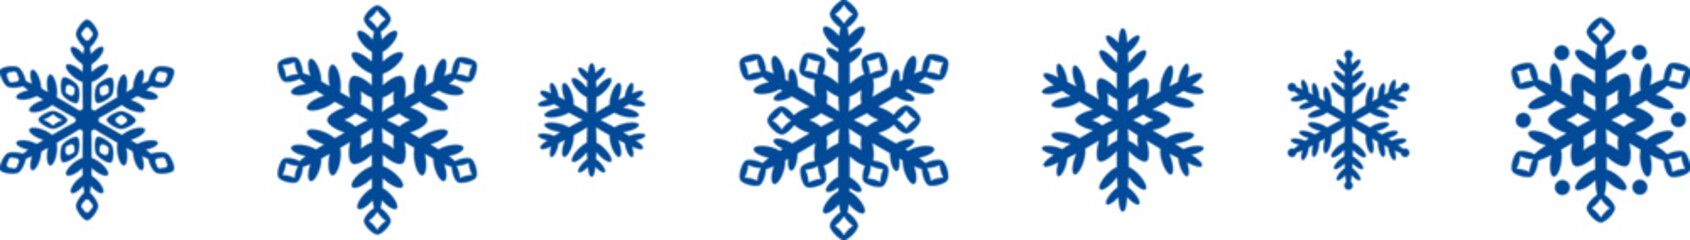 Blue snowflake elements, hand drawn cute snow icon set for the winter holidays, decorative clip art, isolated